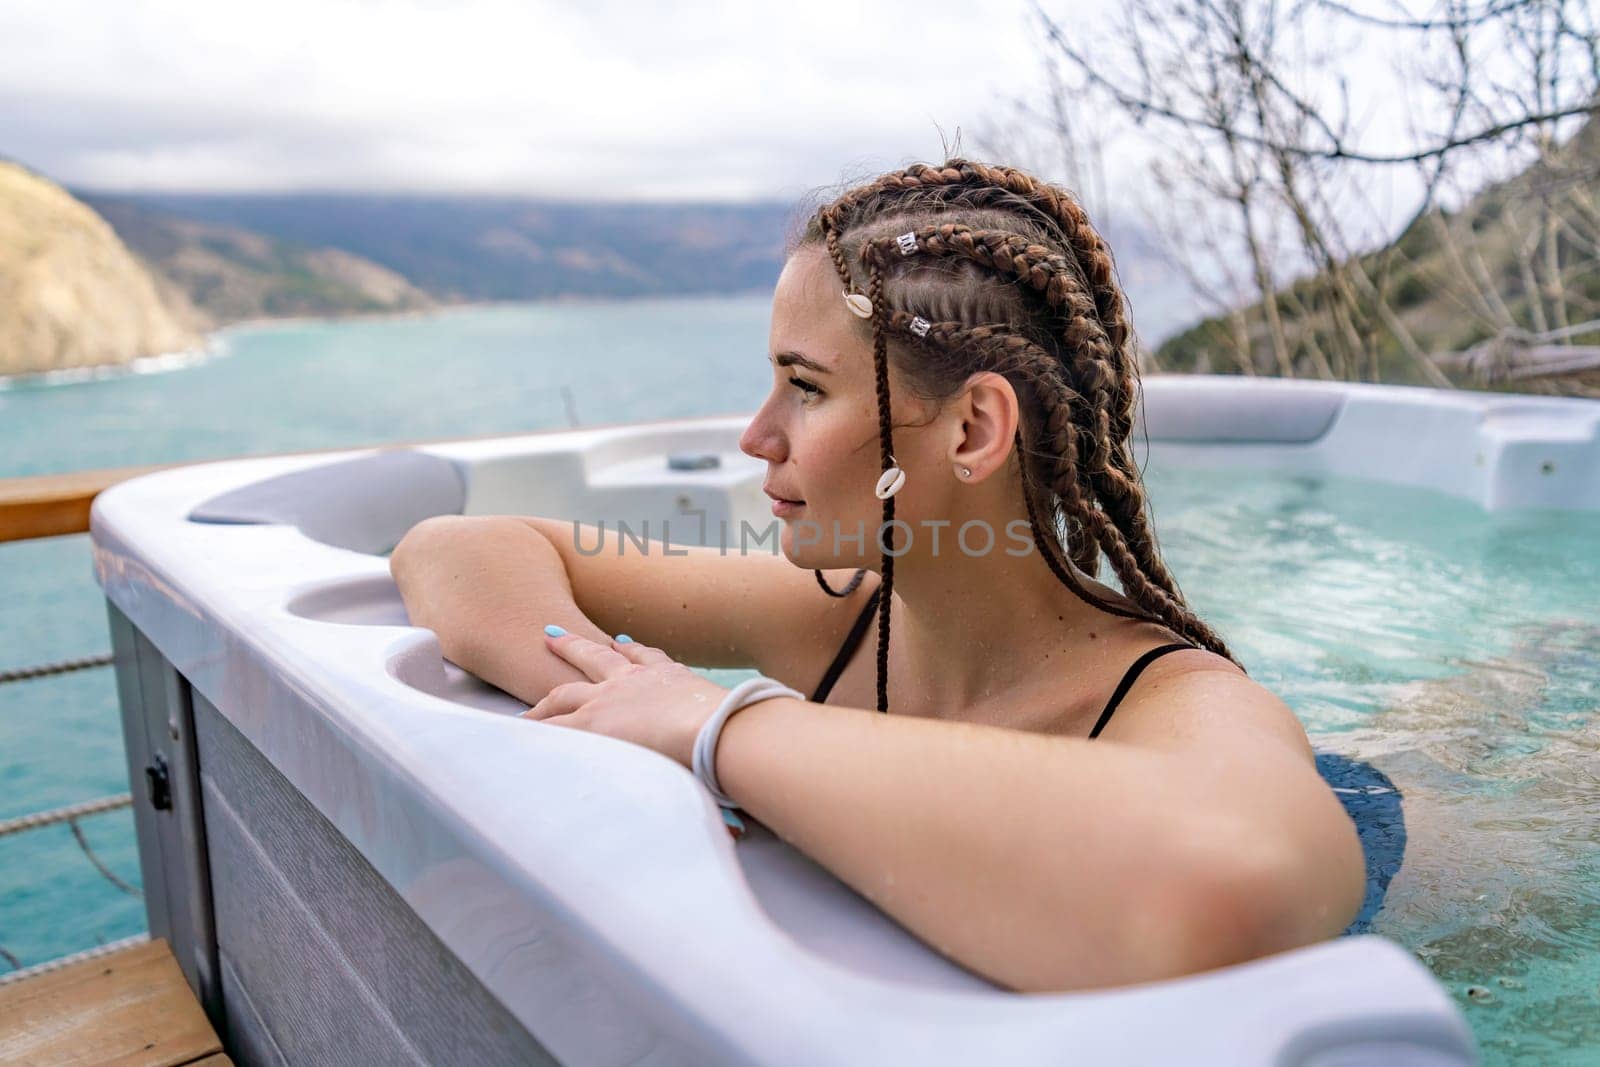 Take time for yourself. Outdoor swimsuit with mountain and sea views. A woman in a black swimsuit is relaxing in the hotel pool, admiring the view.